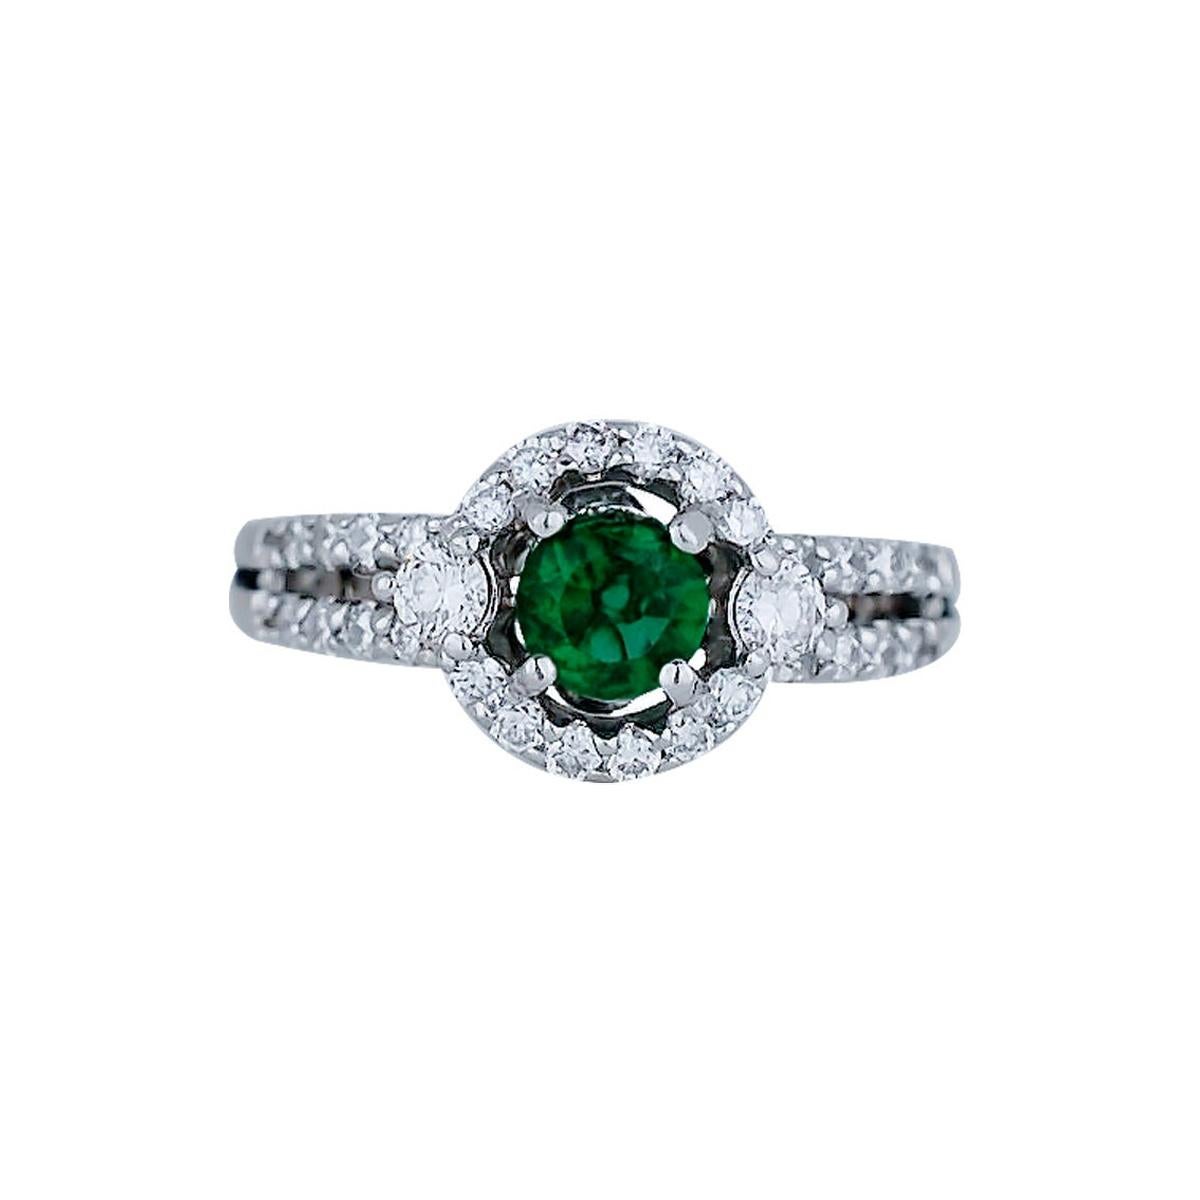 Chatham Emerald Set with Diamonds in Halo Diamond Ring, 1.25 Carat For Sale